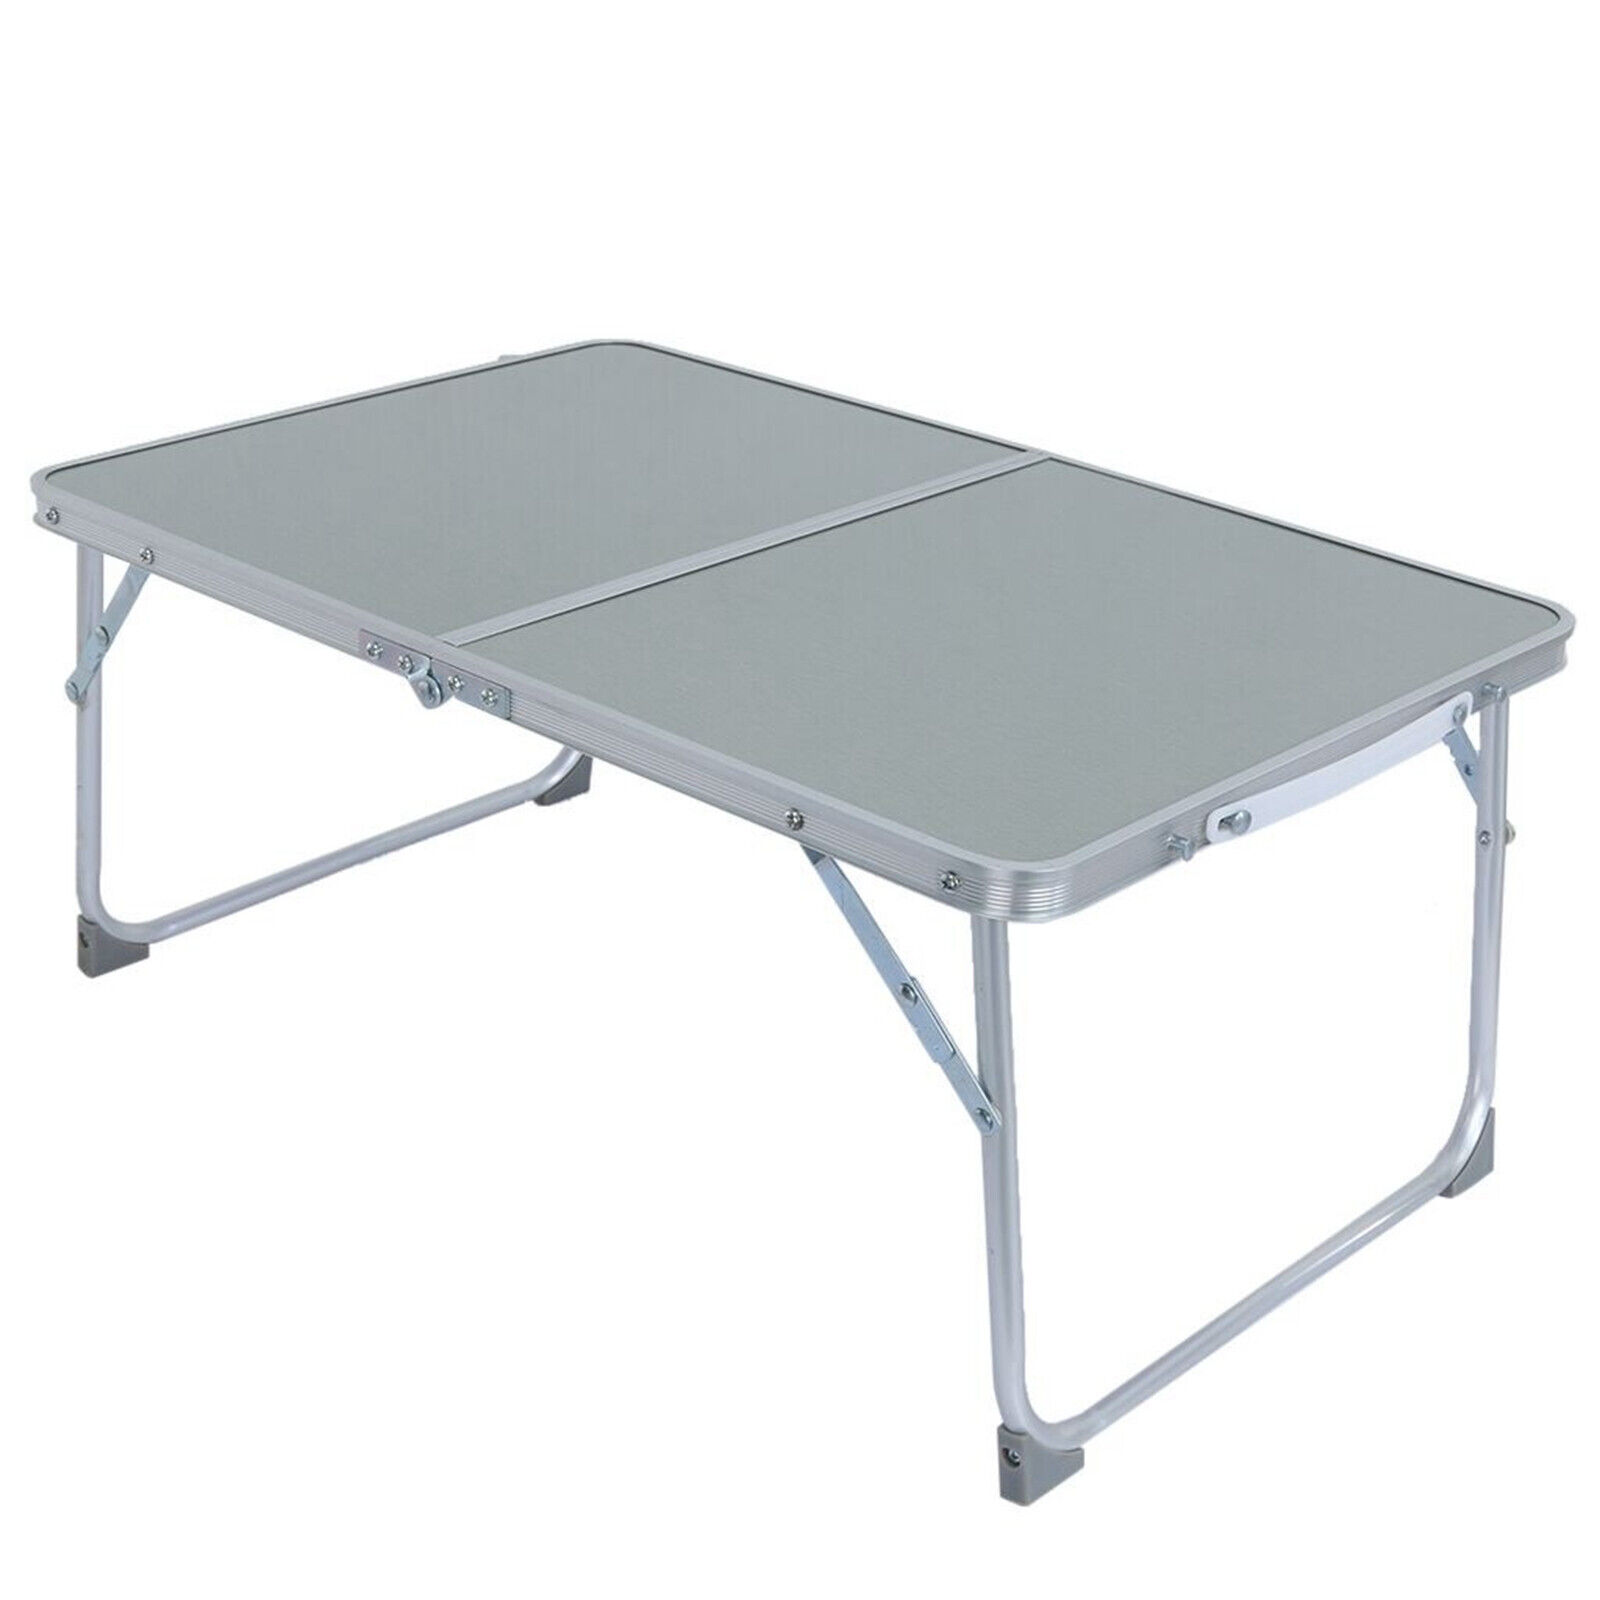 Large Foldable Alloy Picnic Table Portable Bed Tray WITH Carry Handles-US